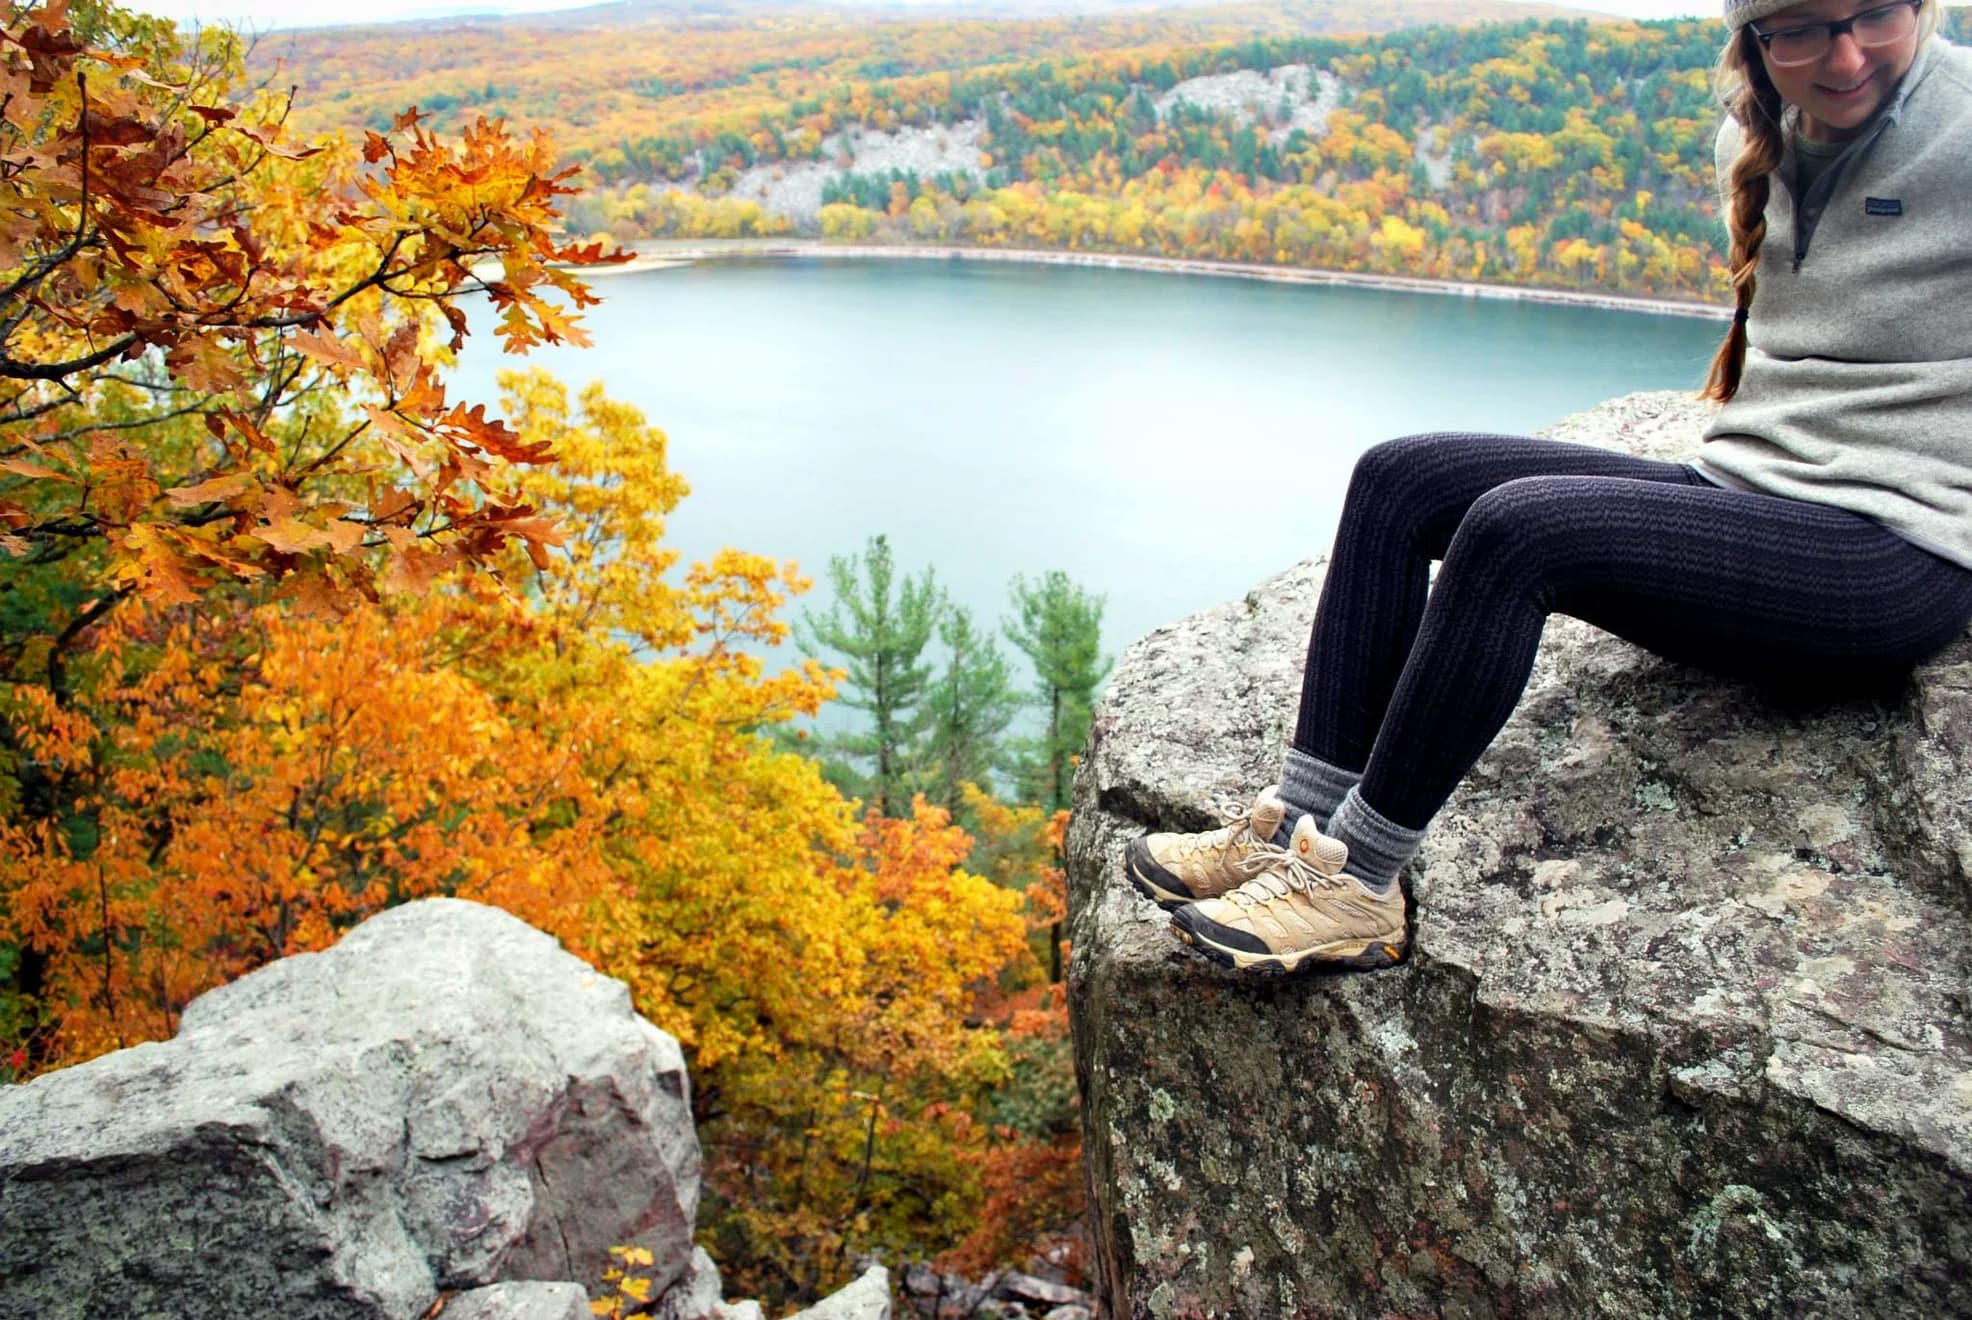 Woman sitting on rock cliff above blue lake surrounded by a forest of trees with orange and yellow leaves.